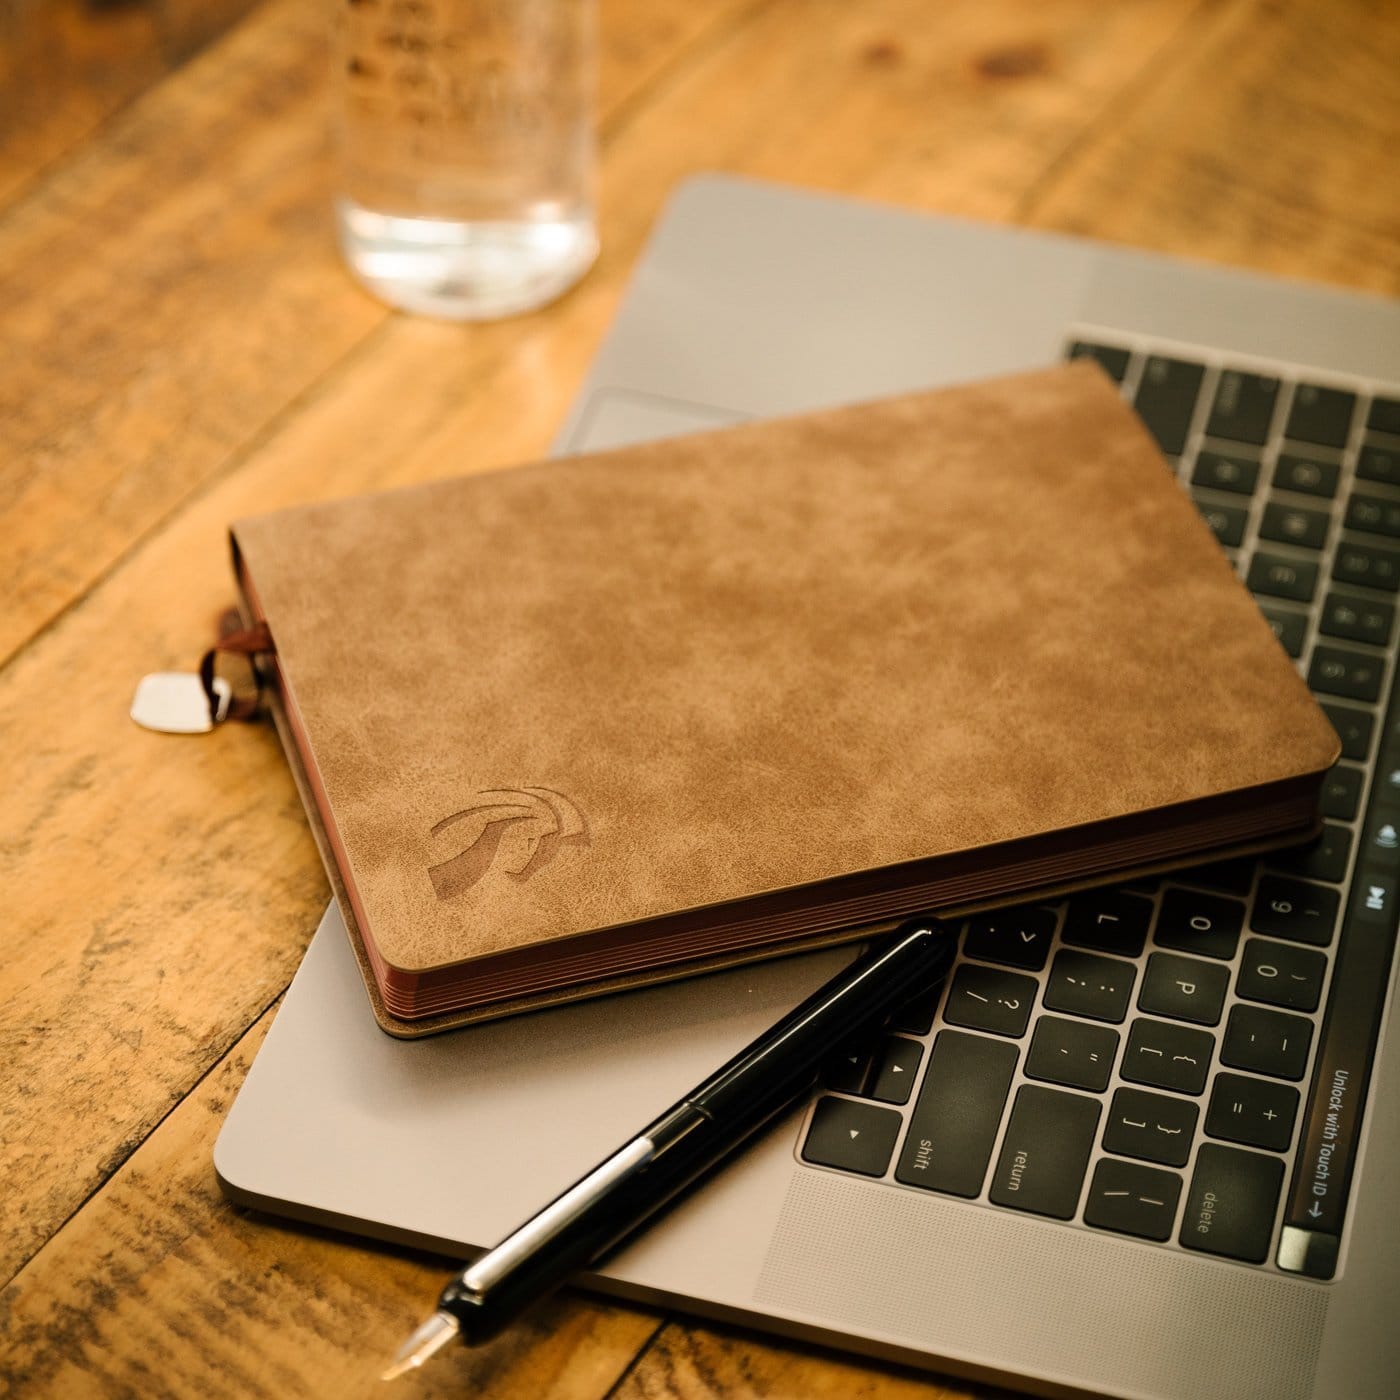 GARRANO | Cocoa Brown - A5 Lined Journal Notebook